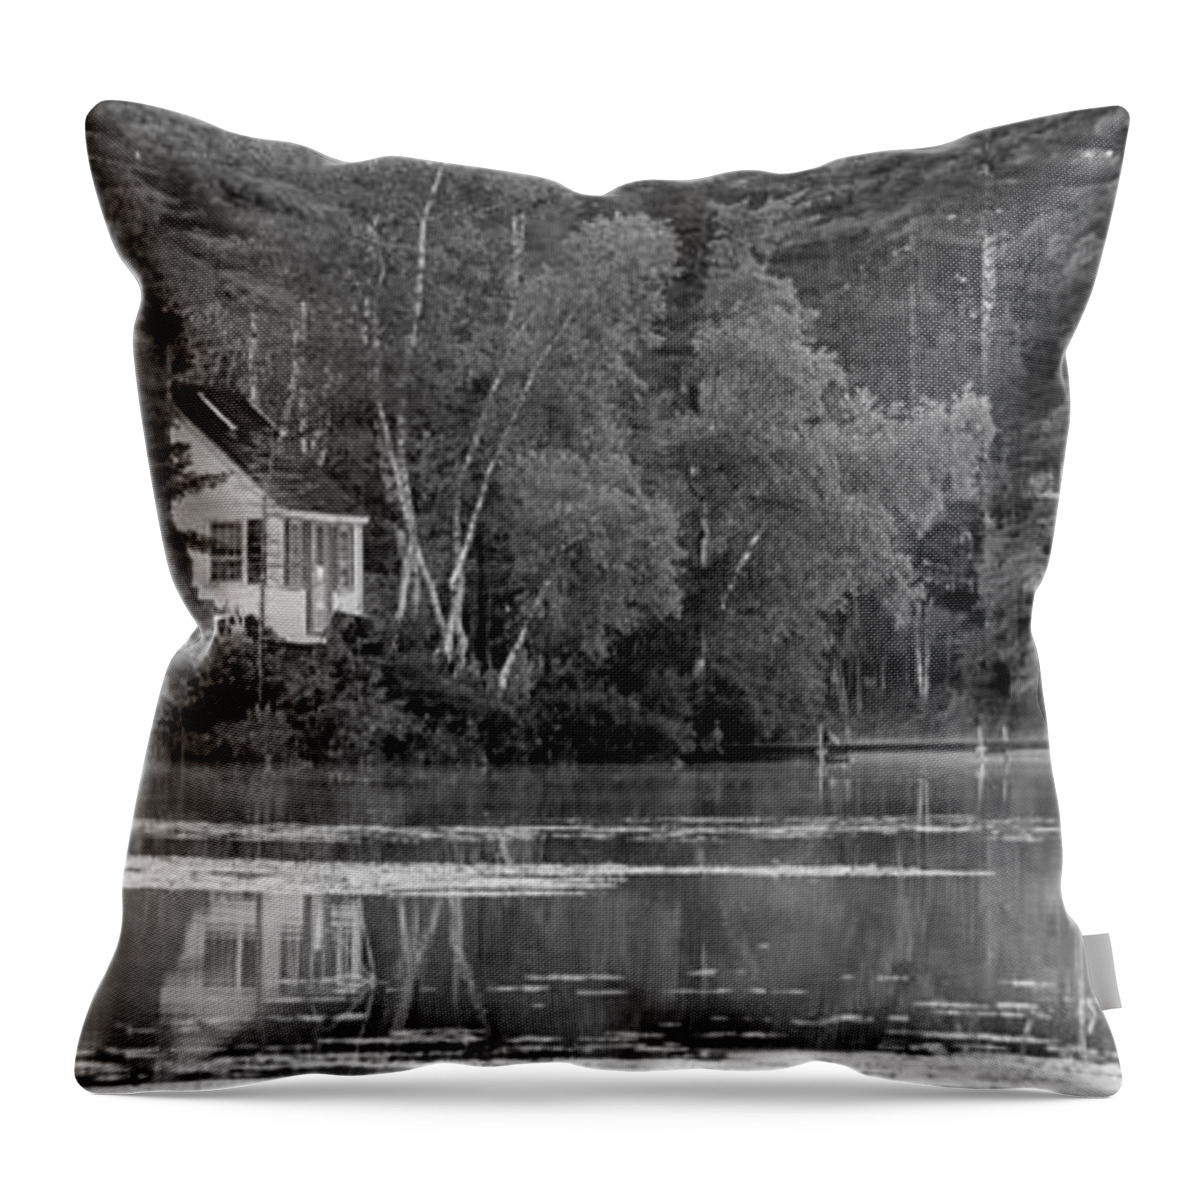 Maine Throw Pillow featuring the photograph Island Cabin - Maine by Steven Ralser